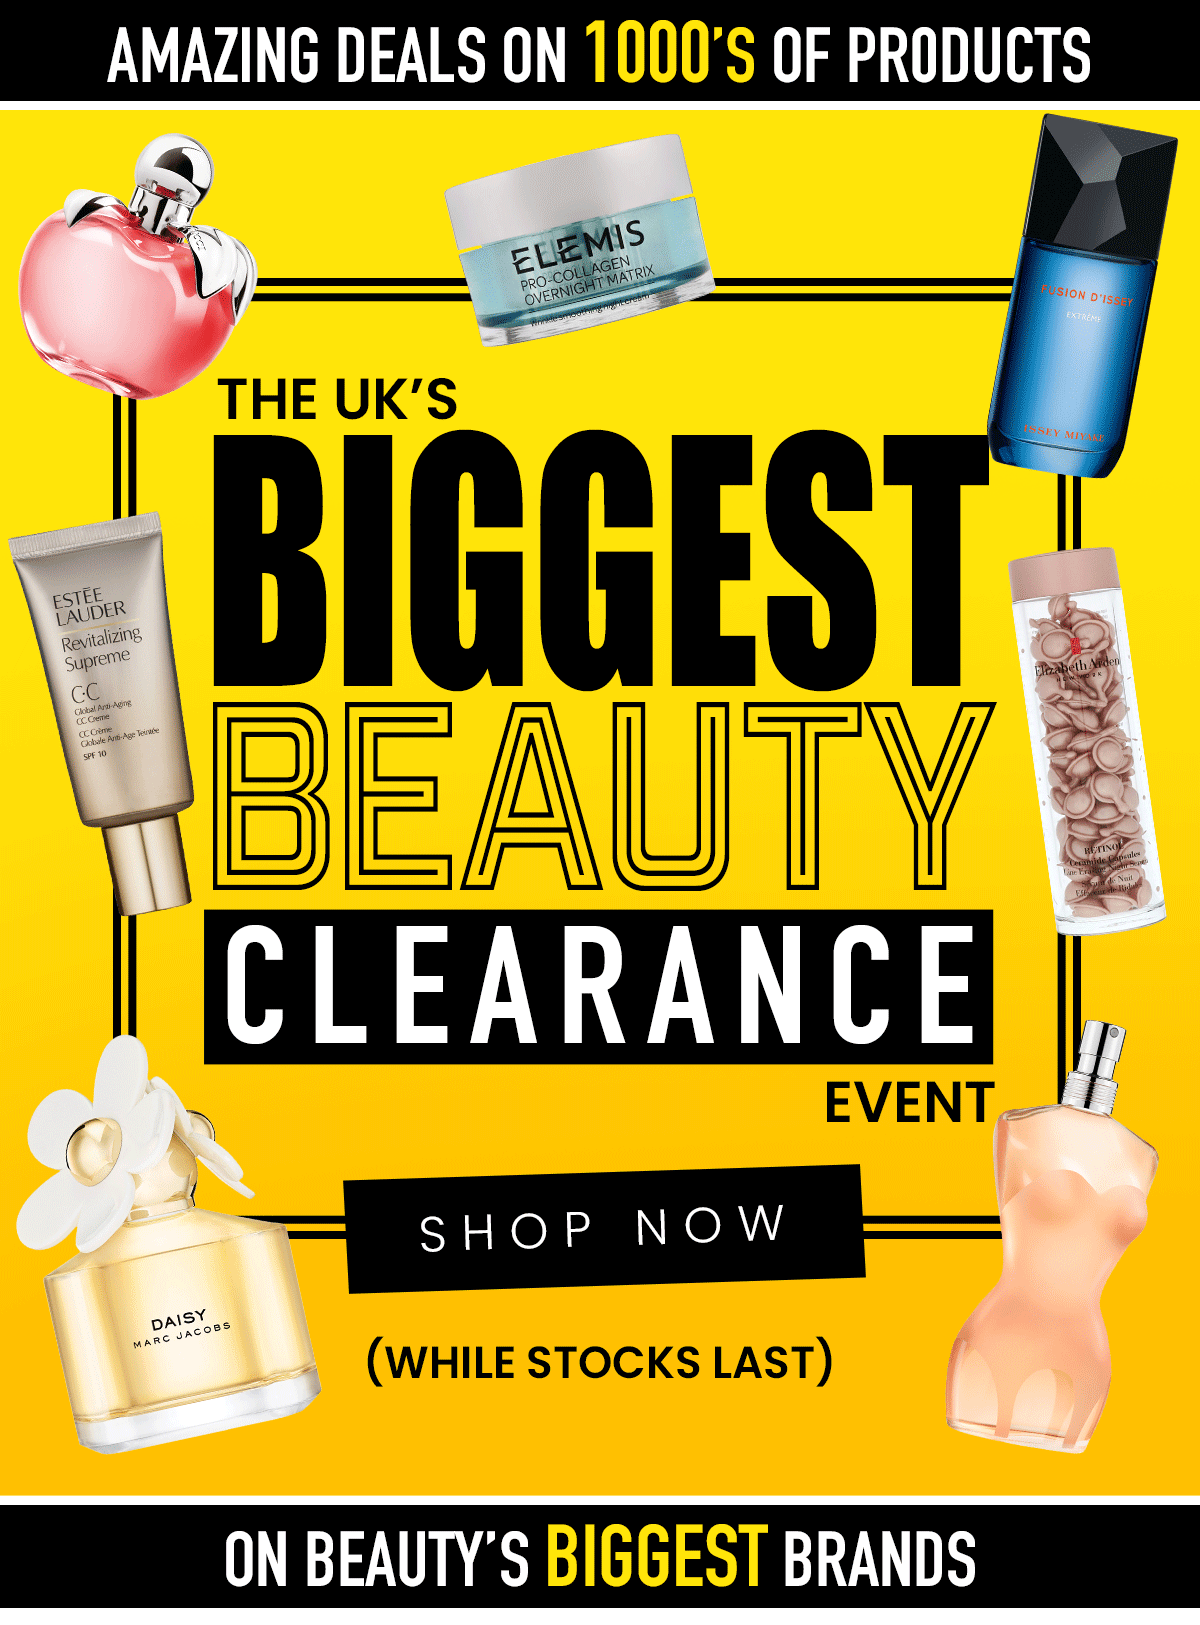 AMAZING DEALS ON 1000'S OF PRODUCTS | THE UK'S BIGGEST BEAUTY CLEARANCE EVENT | SHOP NOW | While Stocks Last